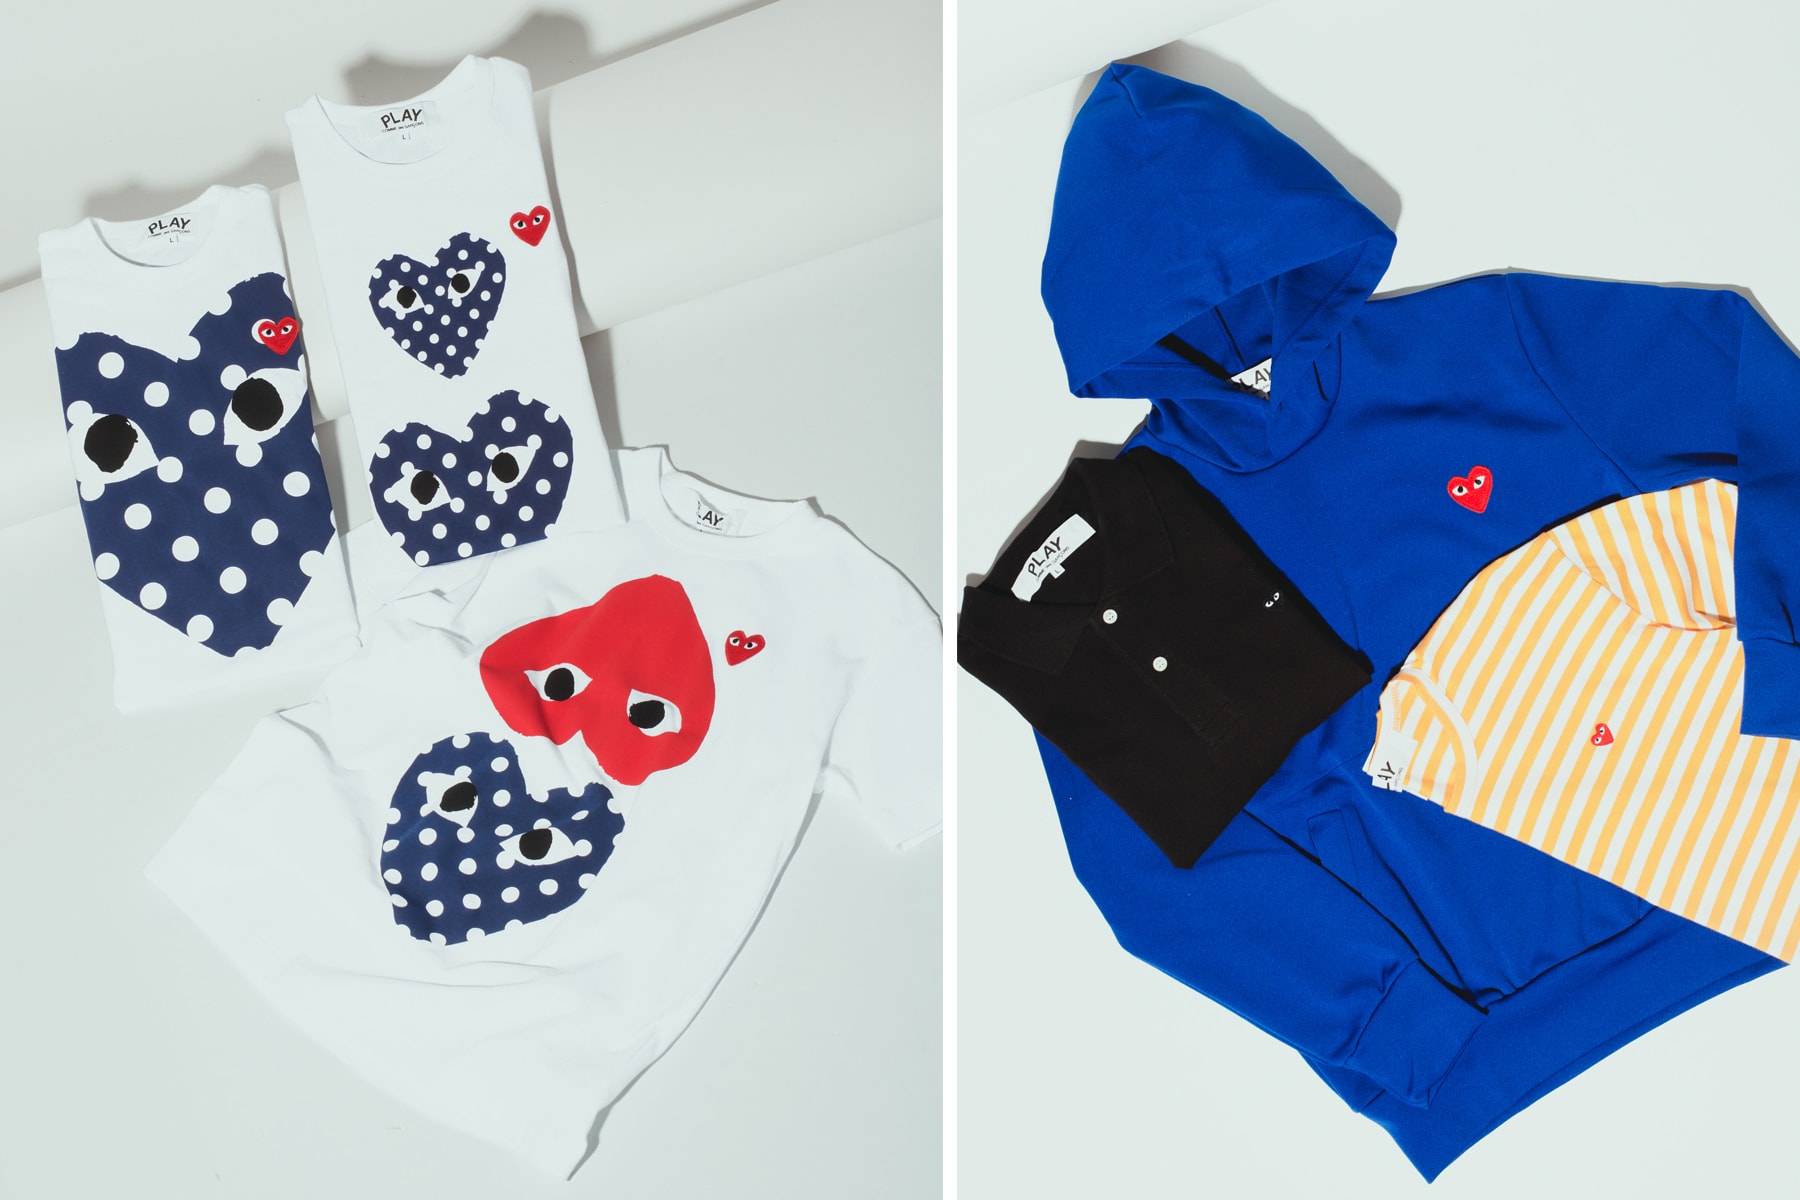 COMME des GARÇONS PLAY Print Collection CDG T-shirt Hoodie Sweatshirt Camouflage Color